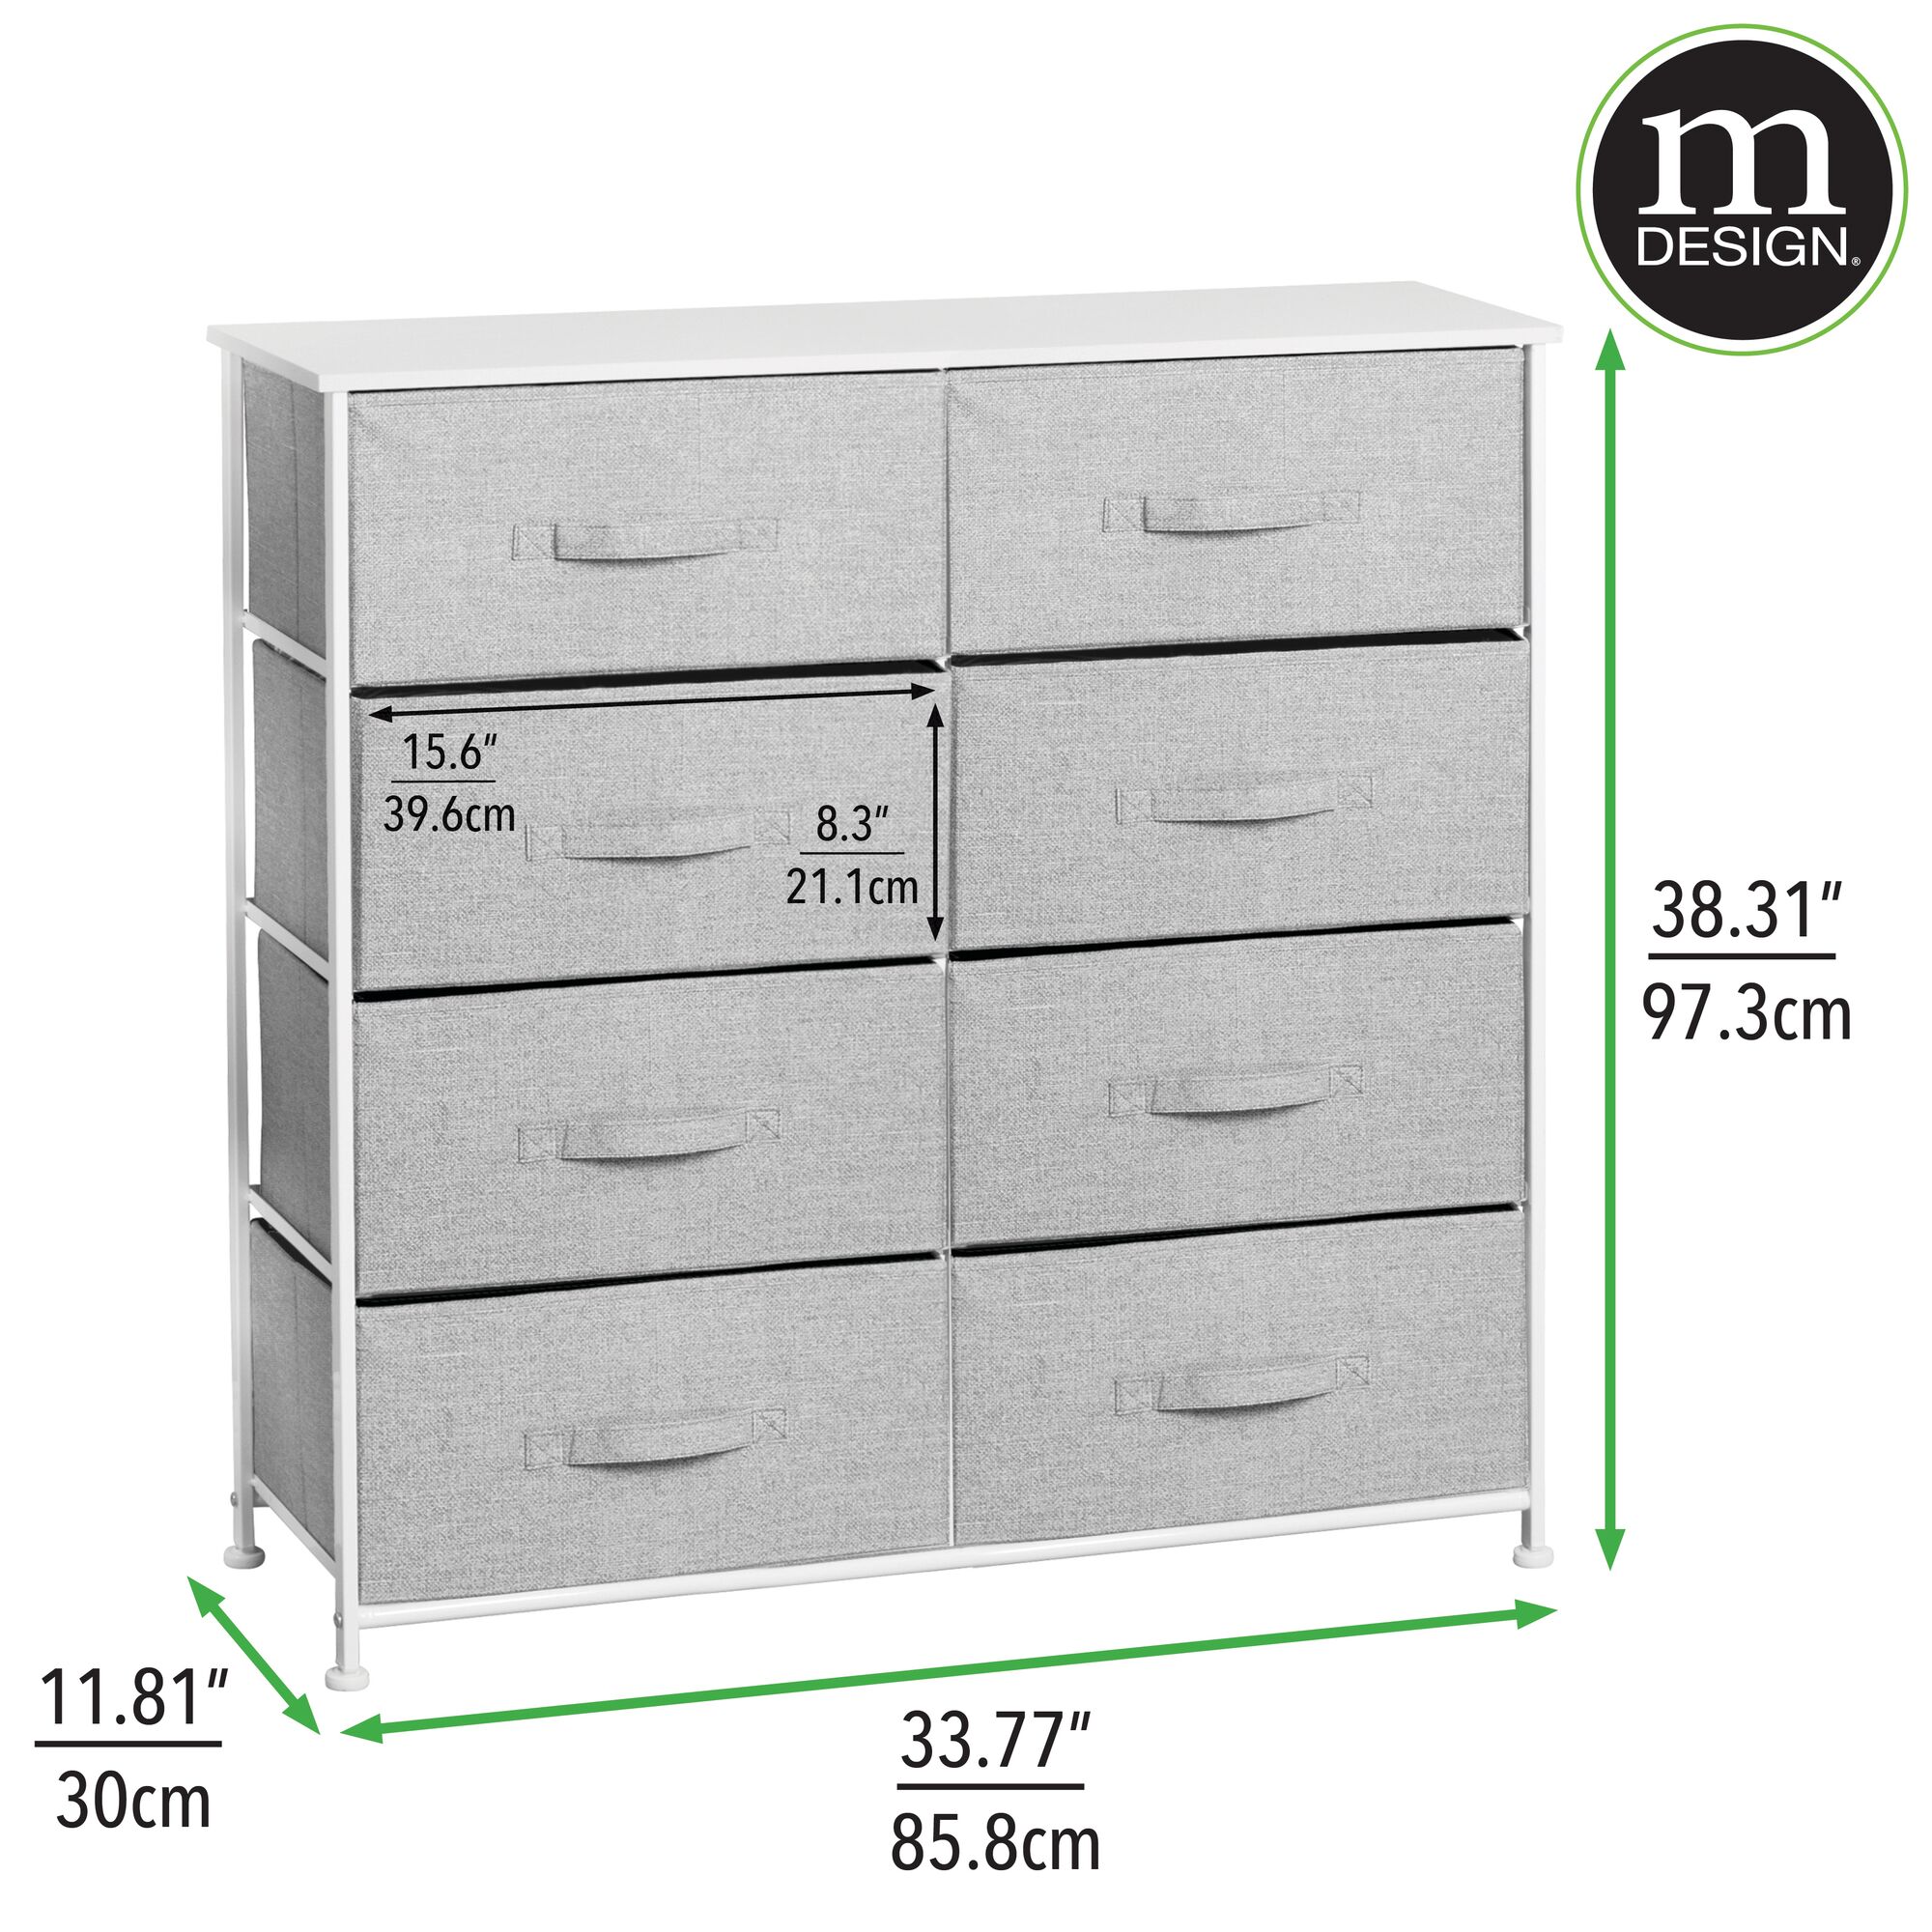 mDesign Large Storage Dresser Furniture with 8 Removable Fabric Drawers, Gray - image 2 of 6